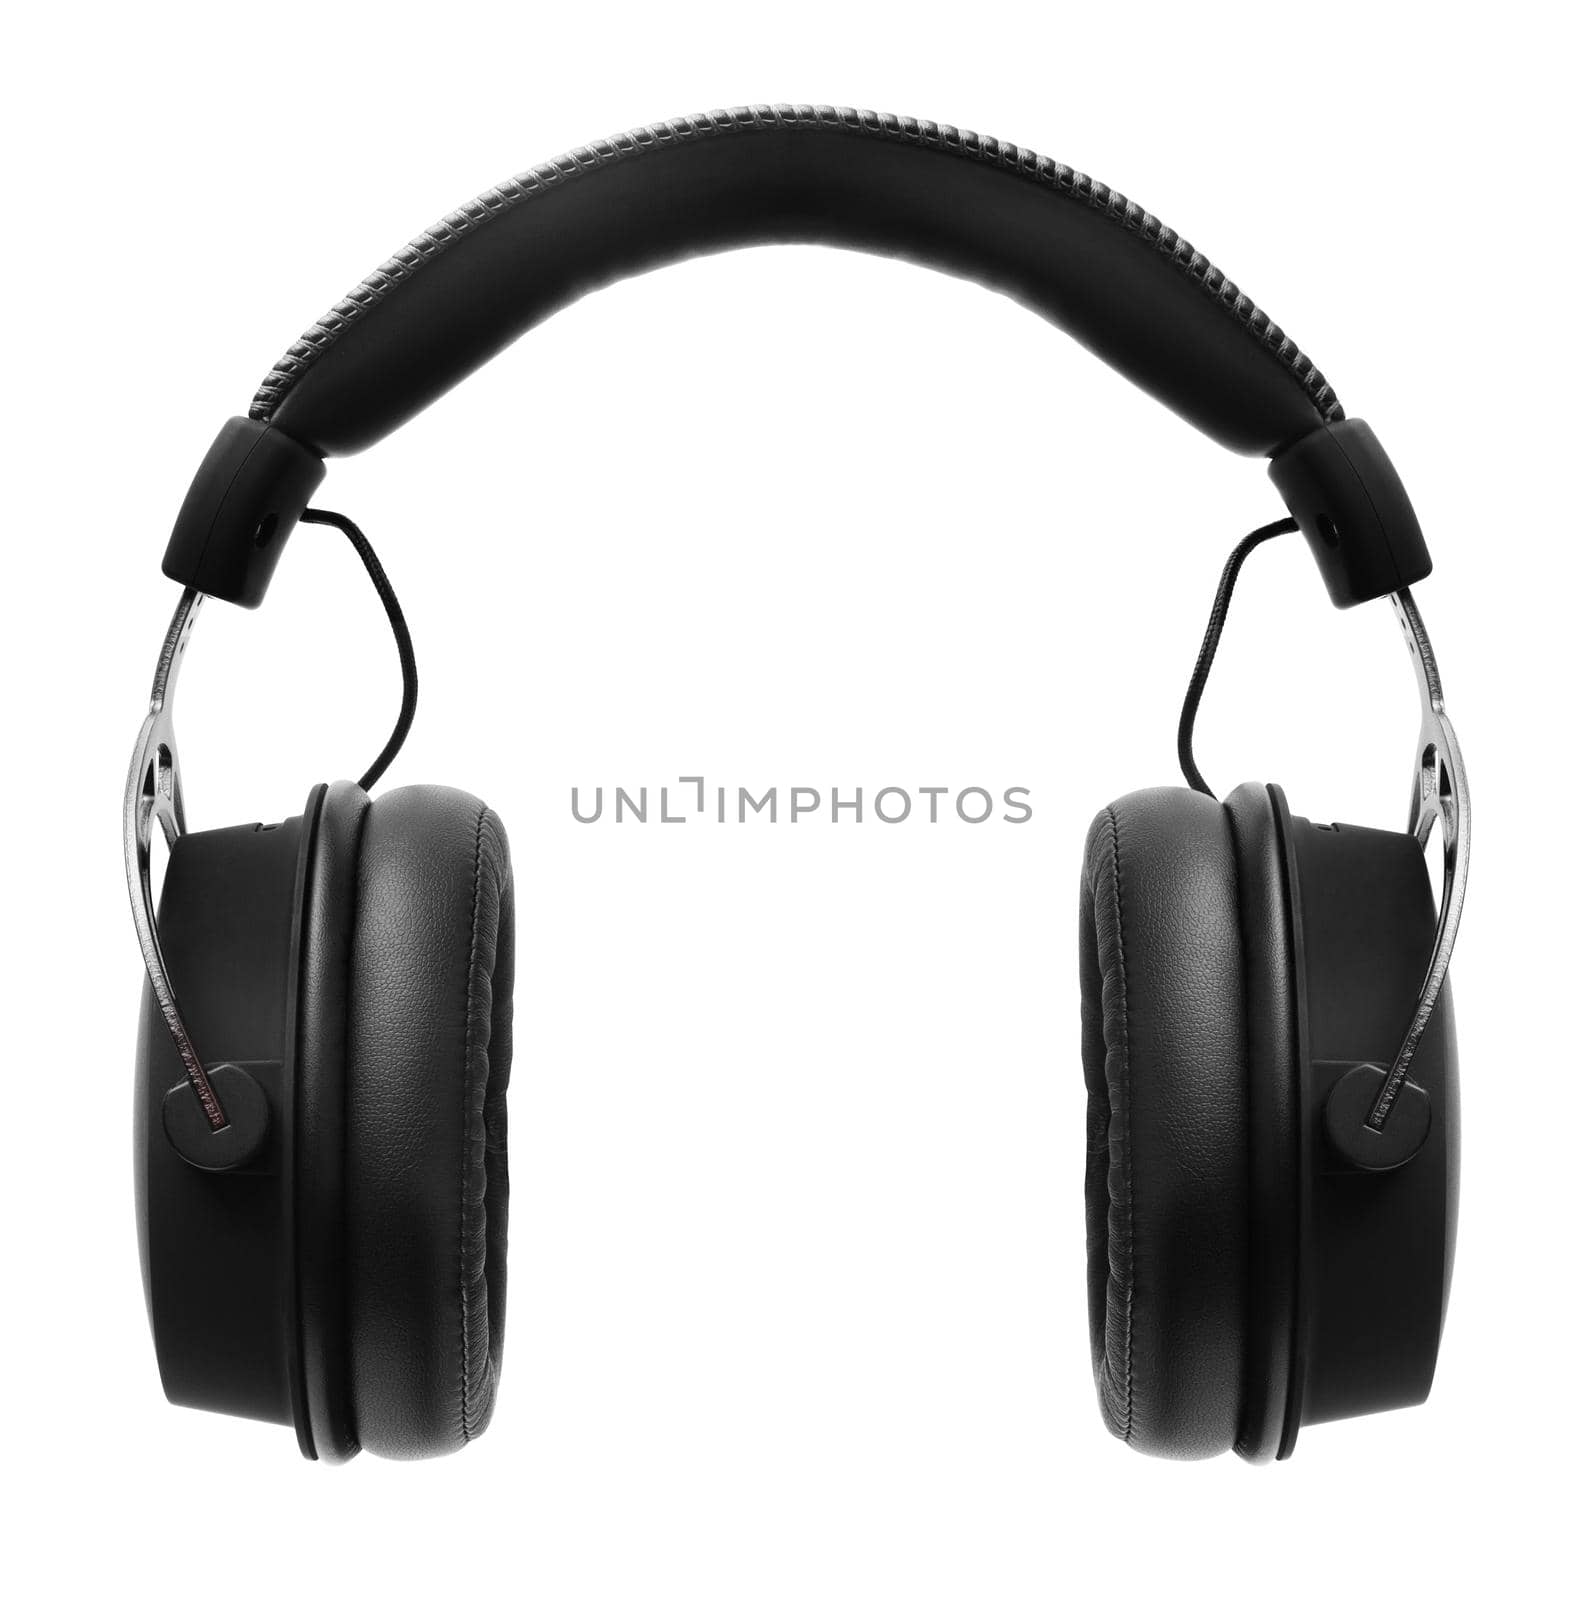 High-quality headphones on a white background. Headphone product photo. With clipping path.